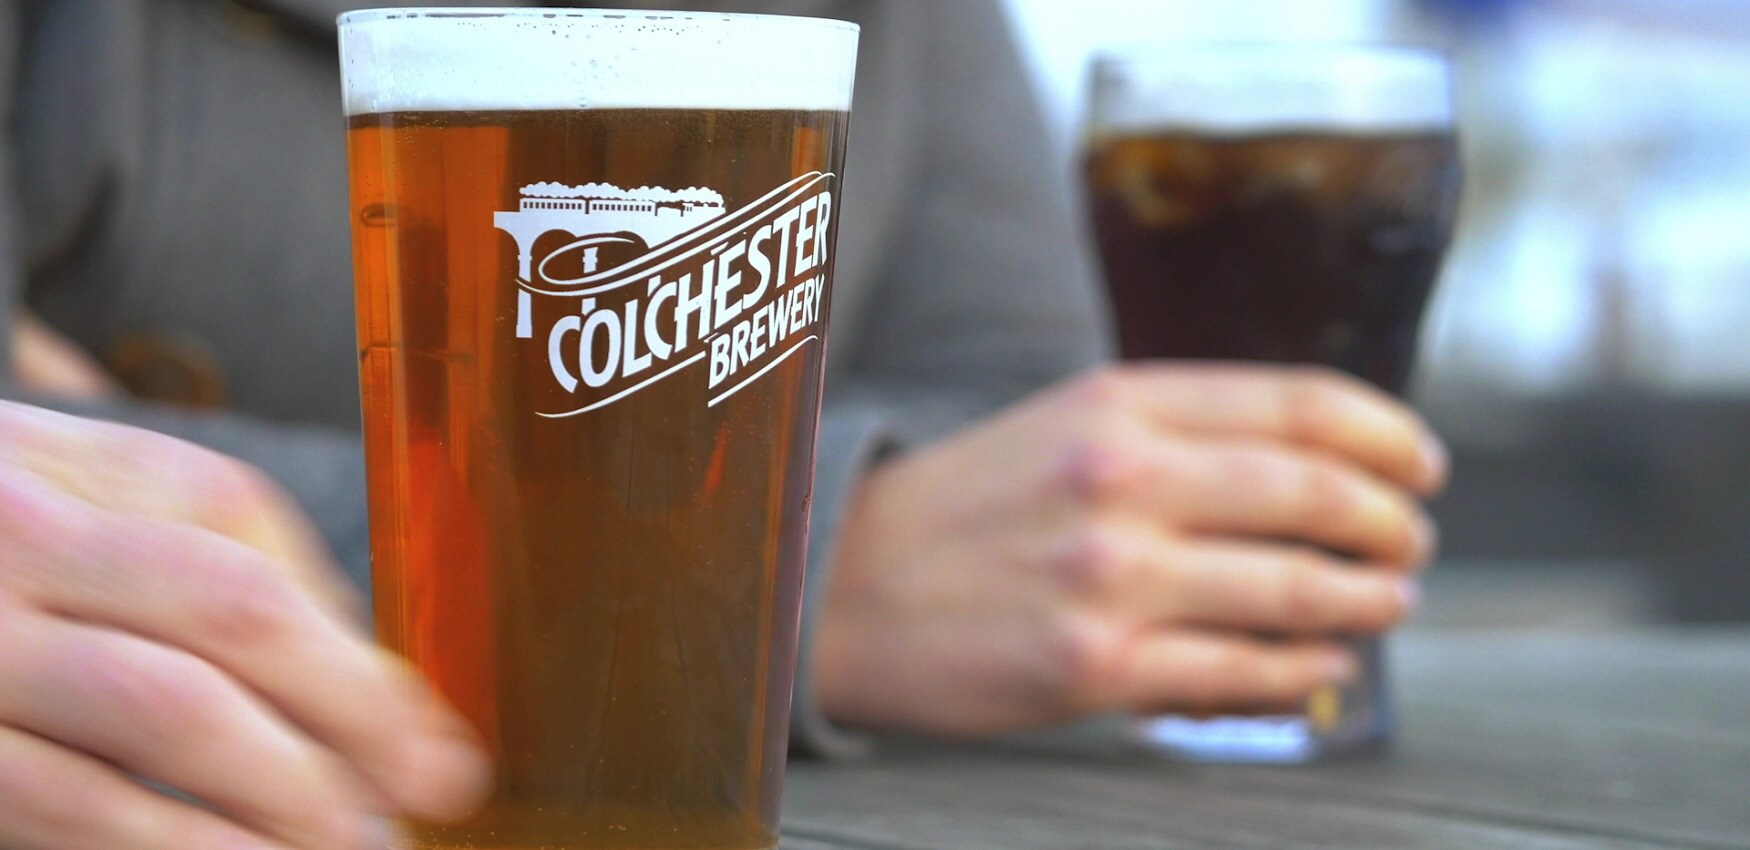 Two Pints of Colchester Brewery Beer